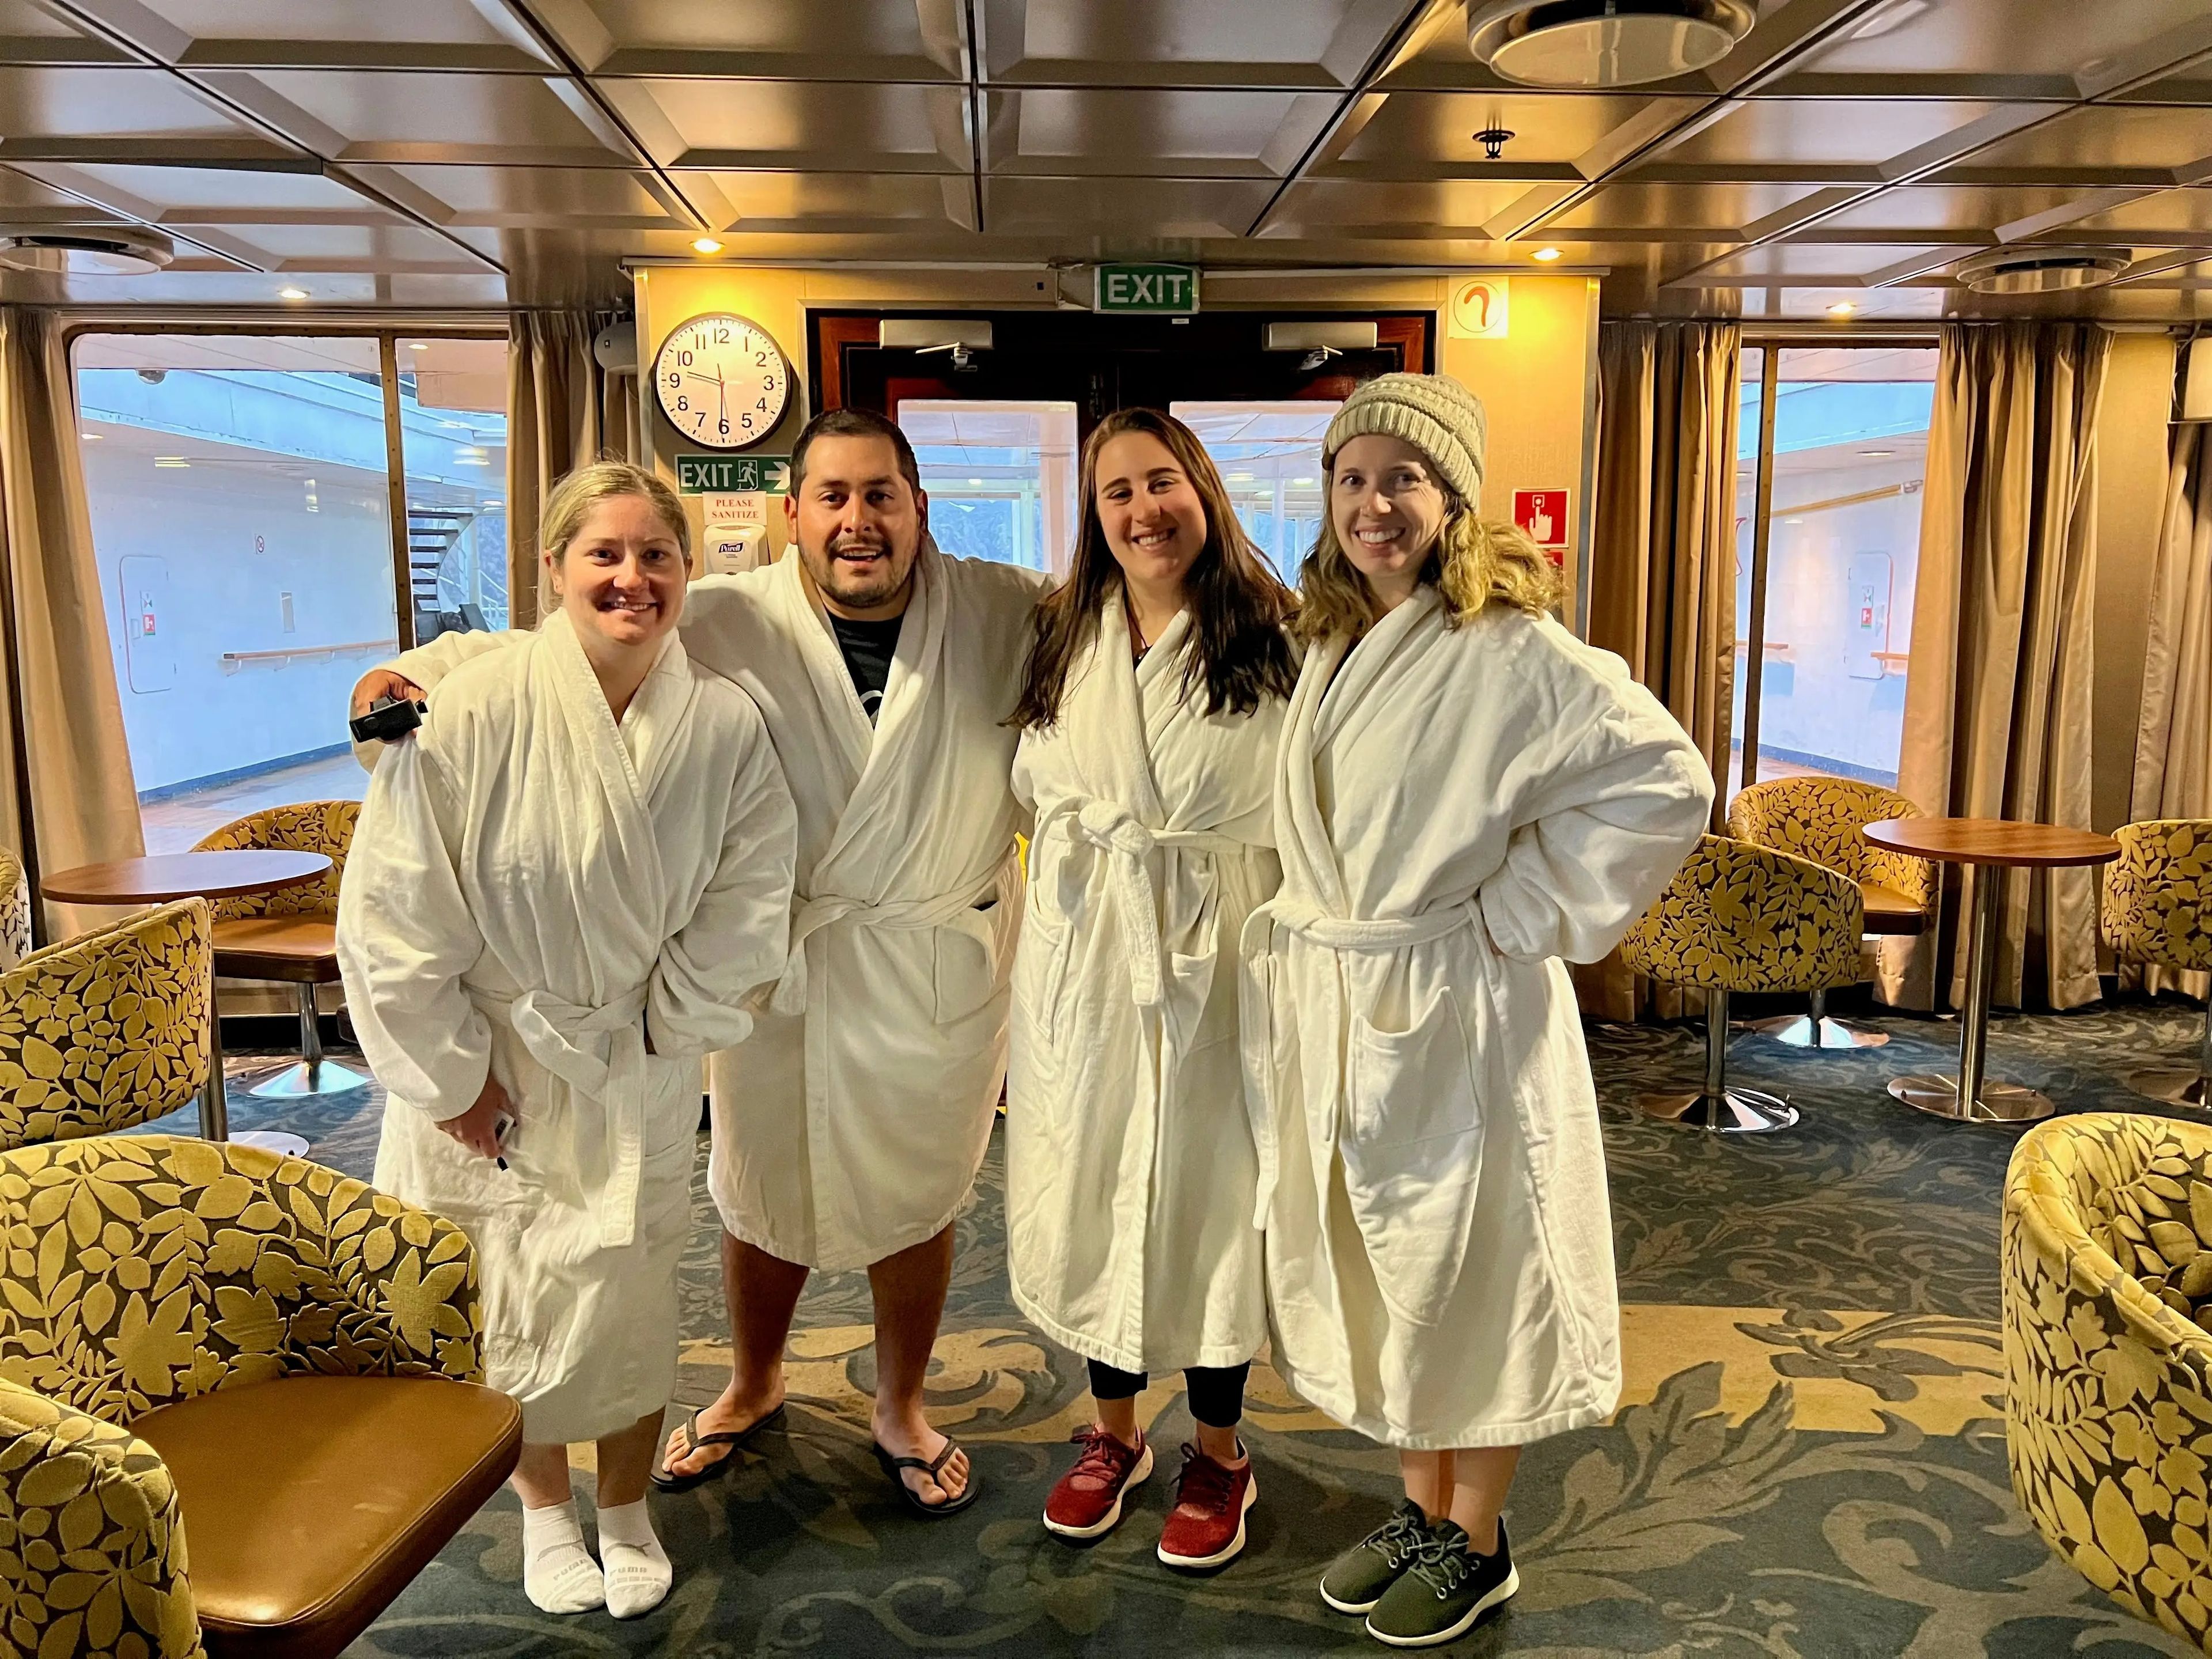 A few of my Antarctic family friends before the polar plunge in the Nautilus Lounge.